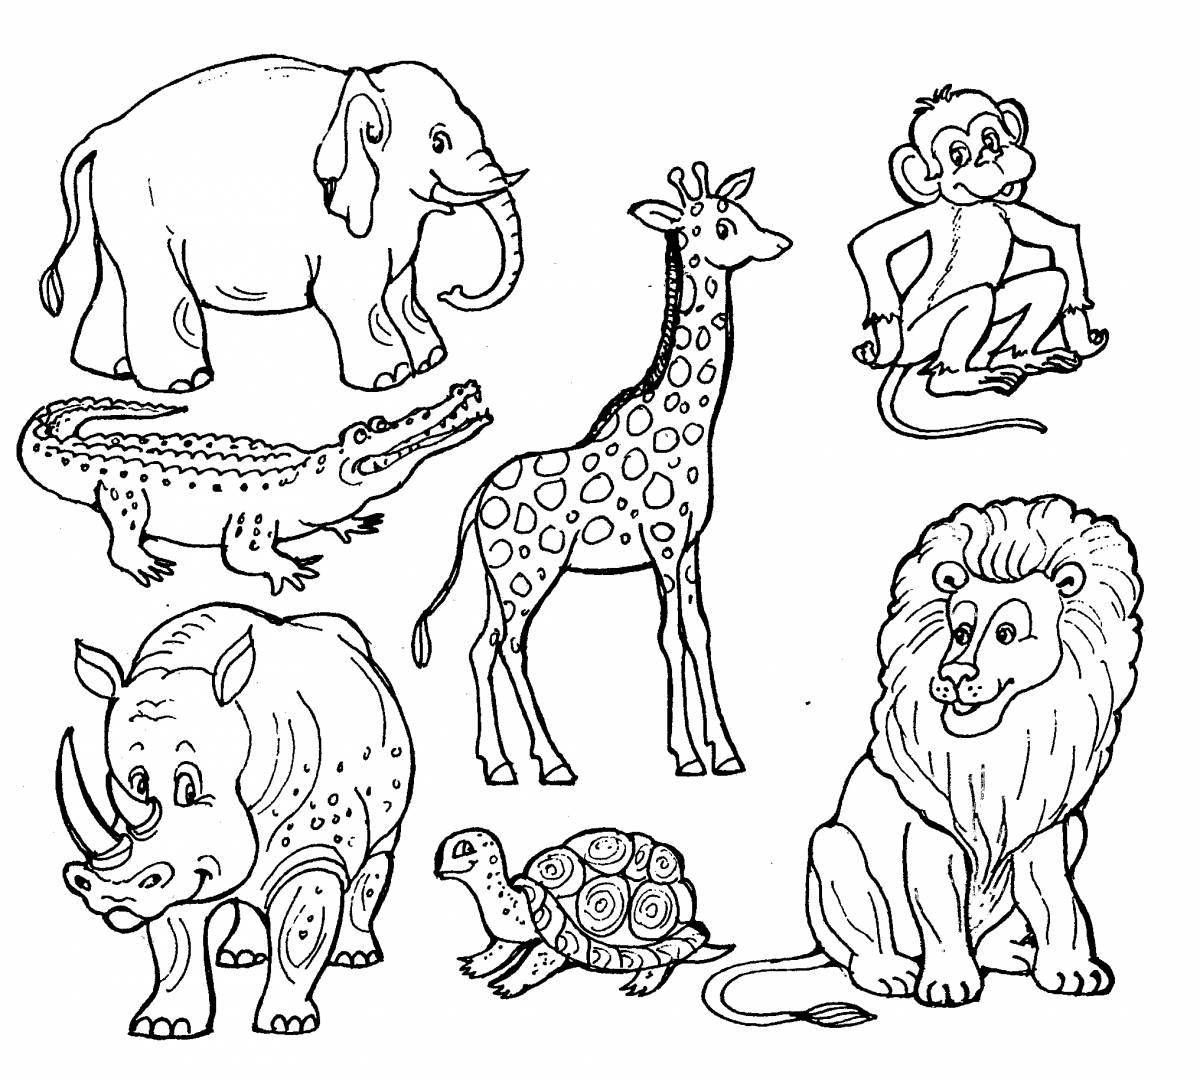 Fun coloring pages of wild animals for preschoolers